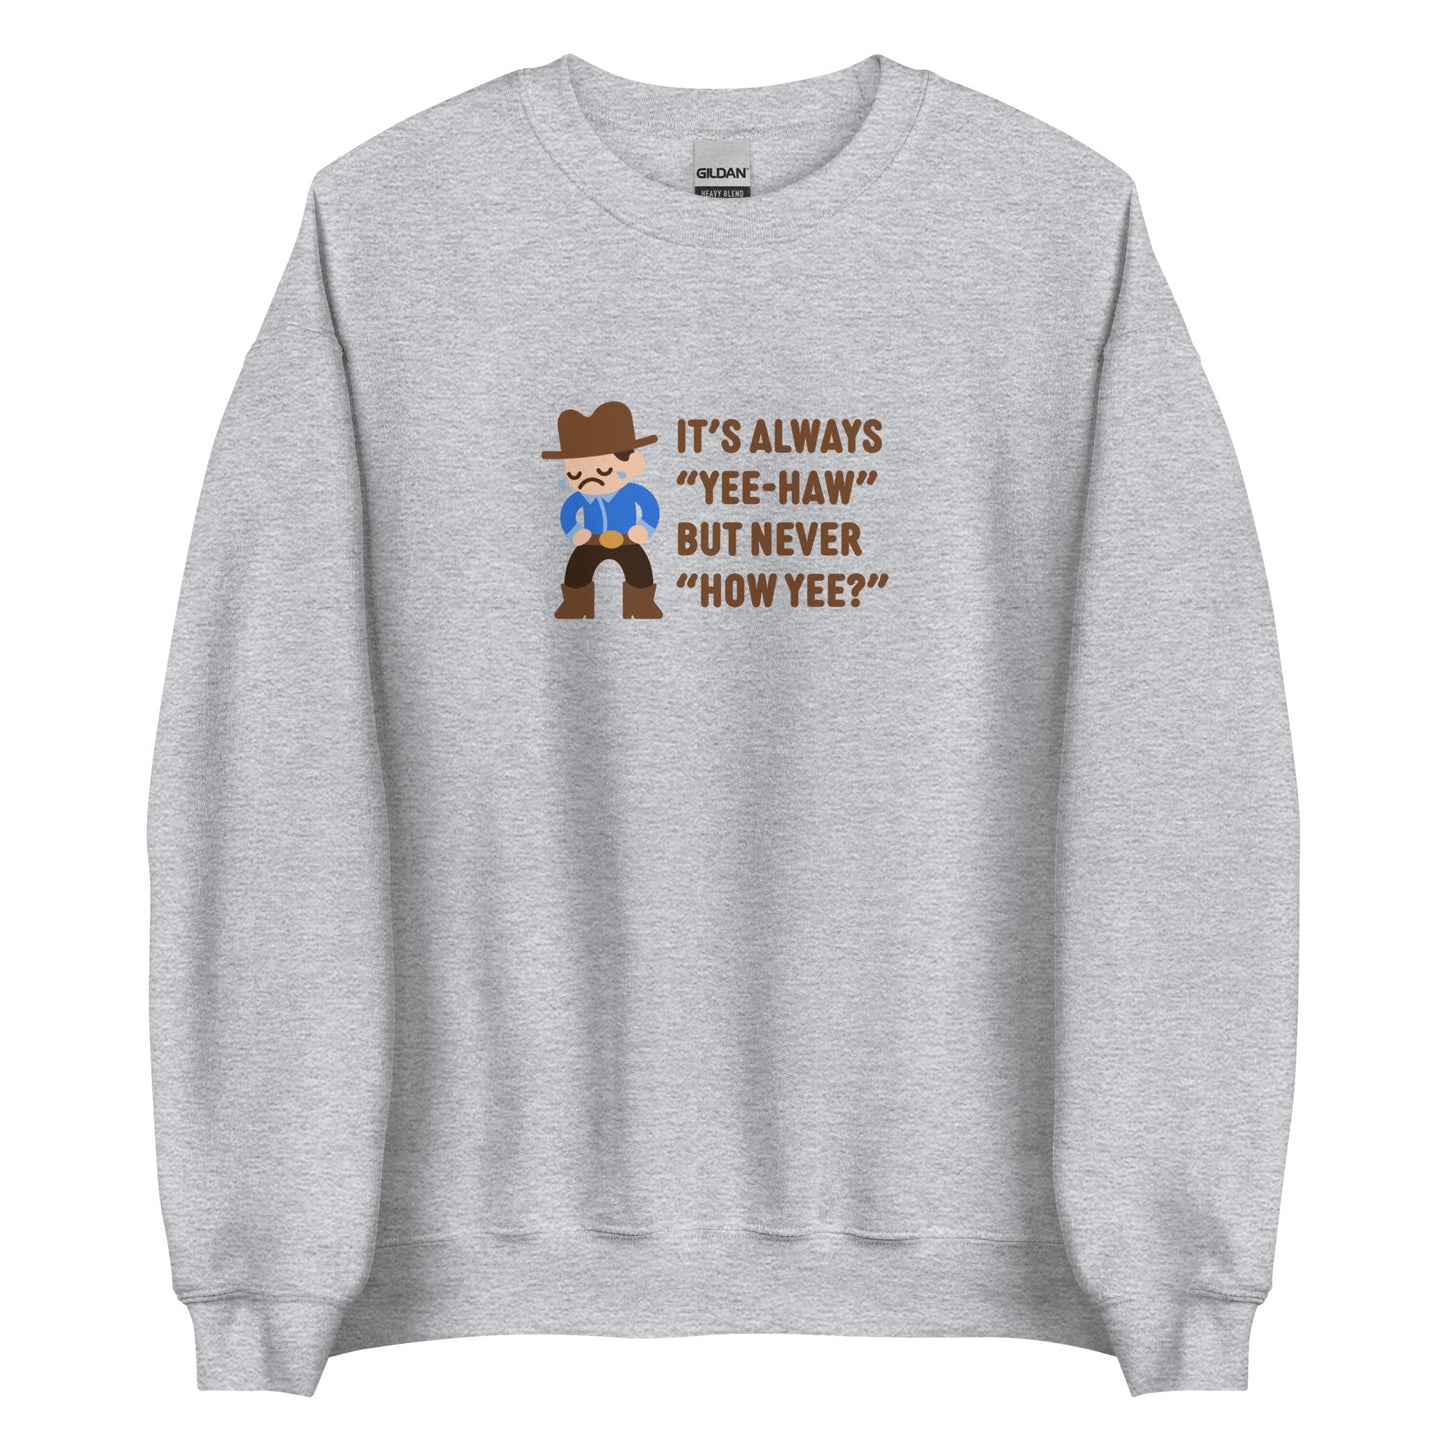 A grey crewneck sweatshirt featuring an illustration of a crying cowboy wearing a blue shirt. Text alongside the cowboy reads "It's always "yee-haw" but never "How yee?""